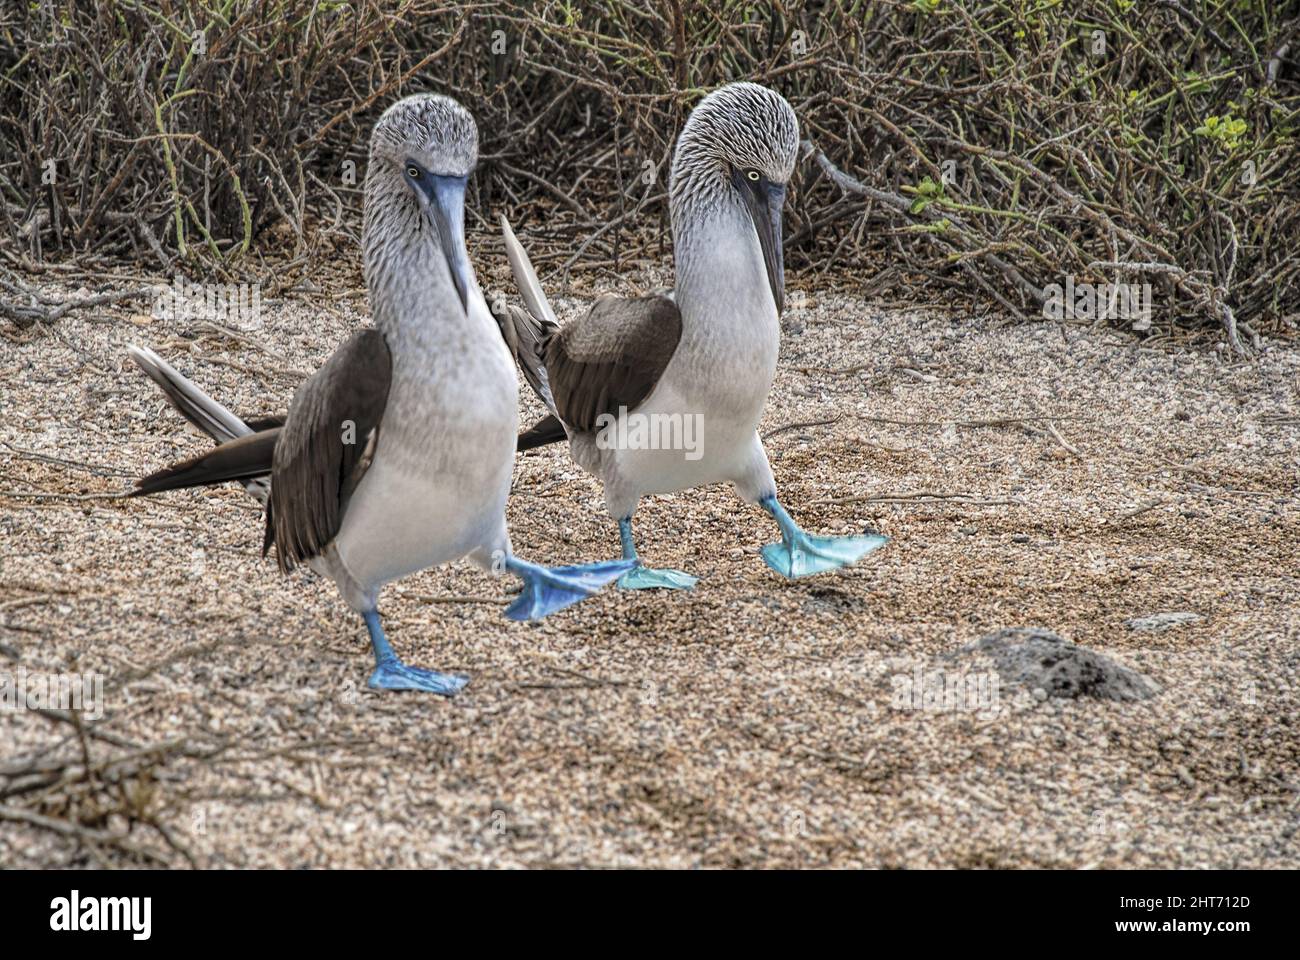 https://c8.alamy.com/comp/2HT712D/beautiful-blue-footed-booby-bird-pair-walking-together-2HT712D.jpg